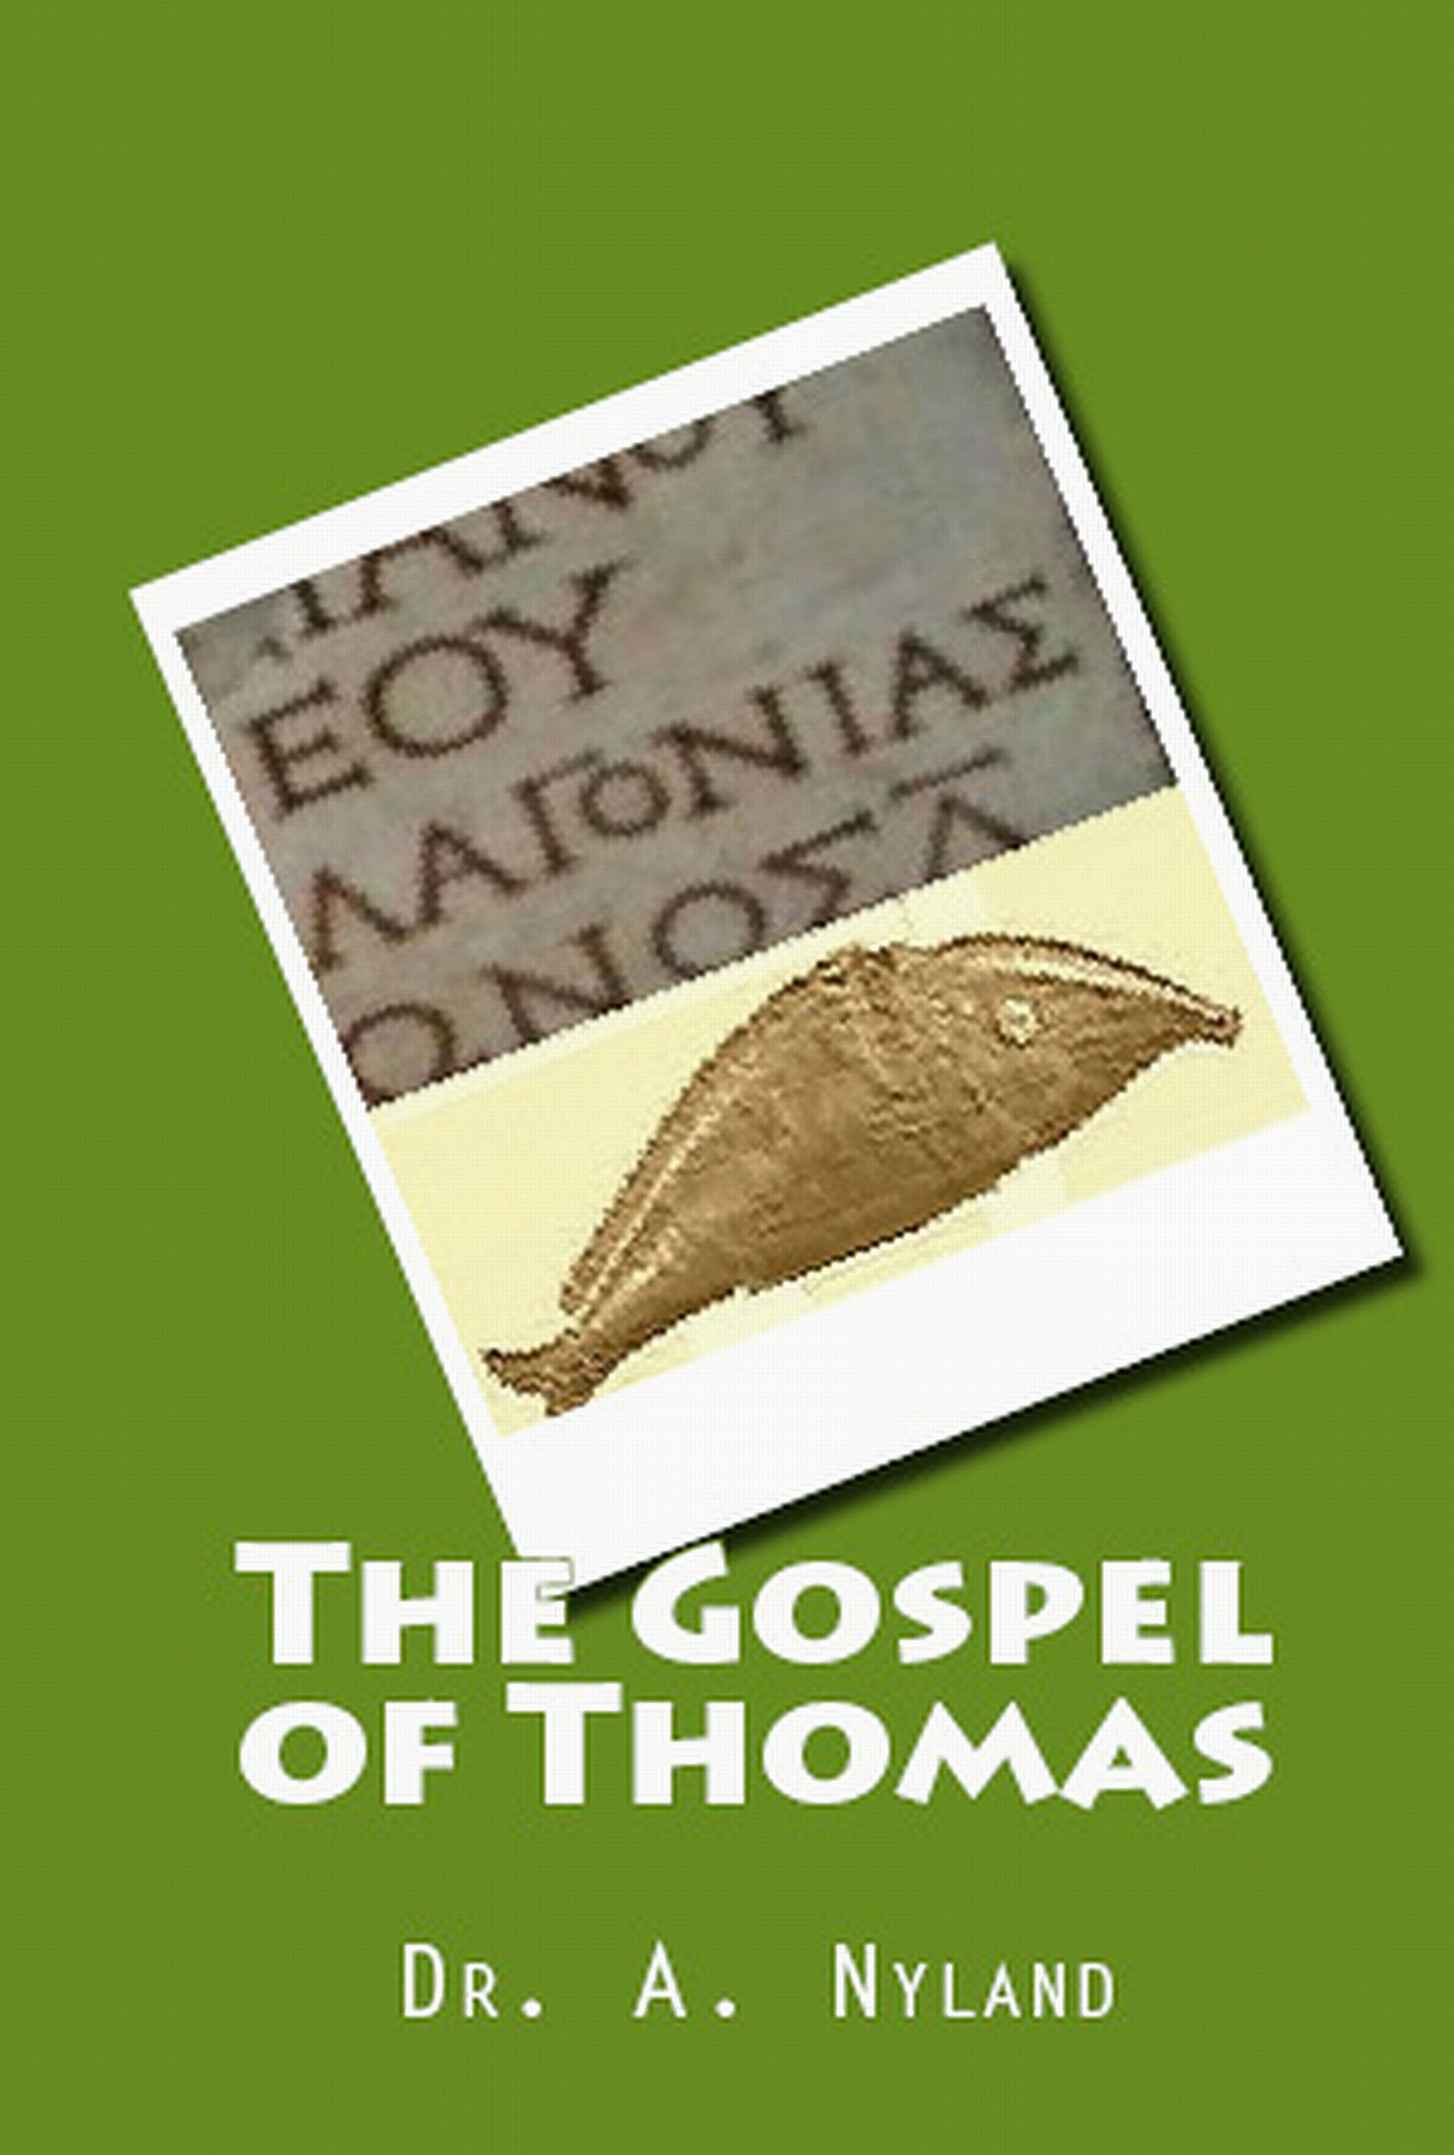 The Gospel of Thomas: Translation With Commentary (Apocrypha / Church History / Gnosticism)